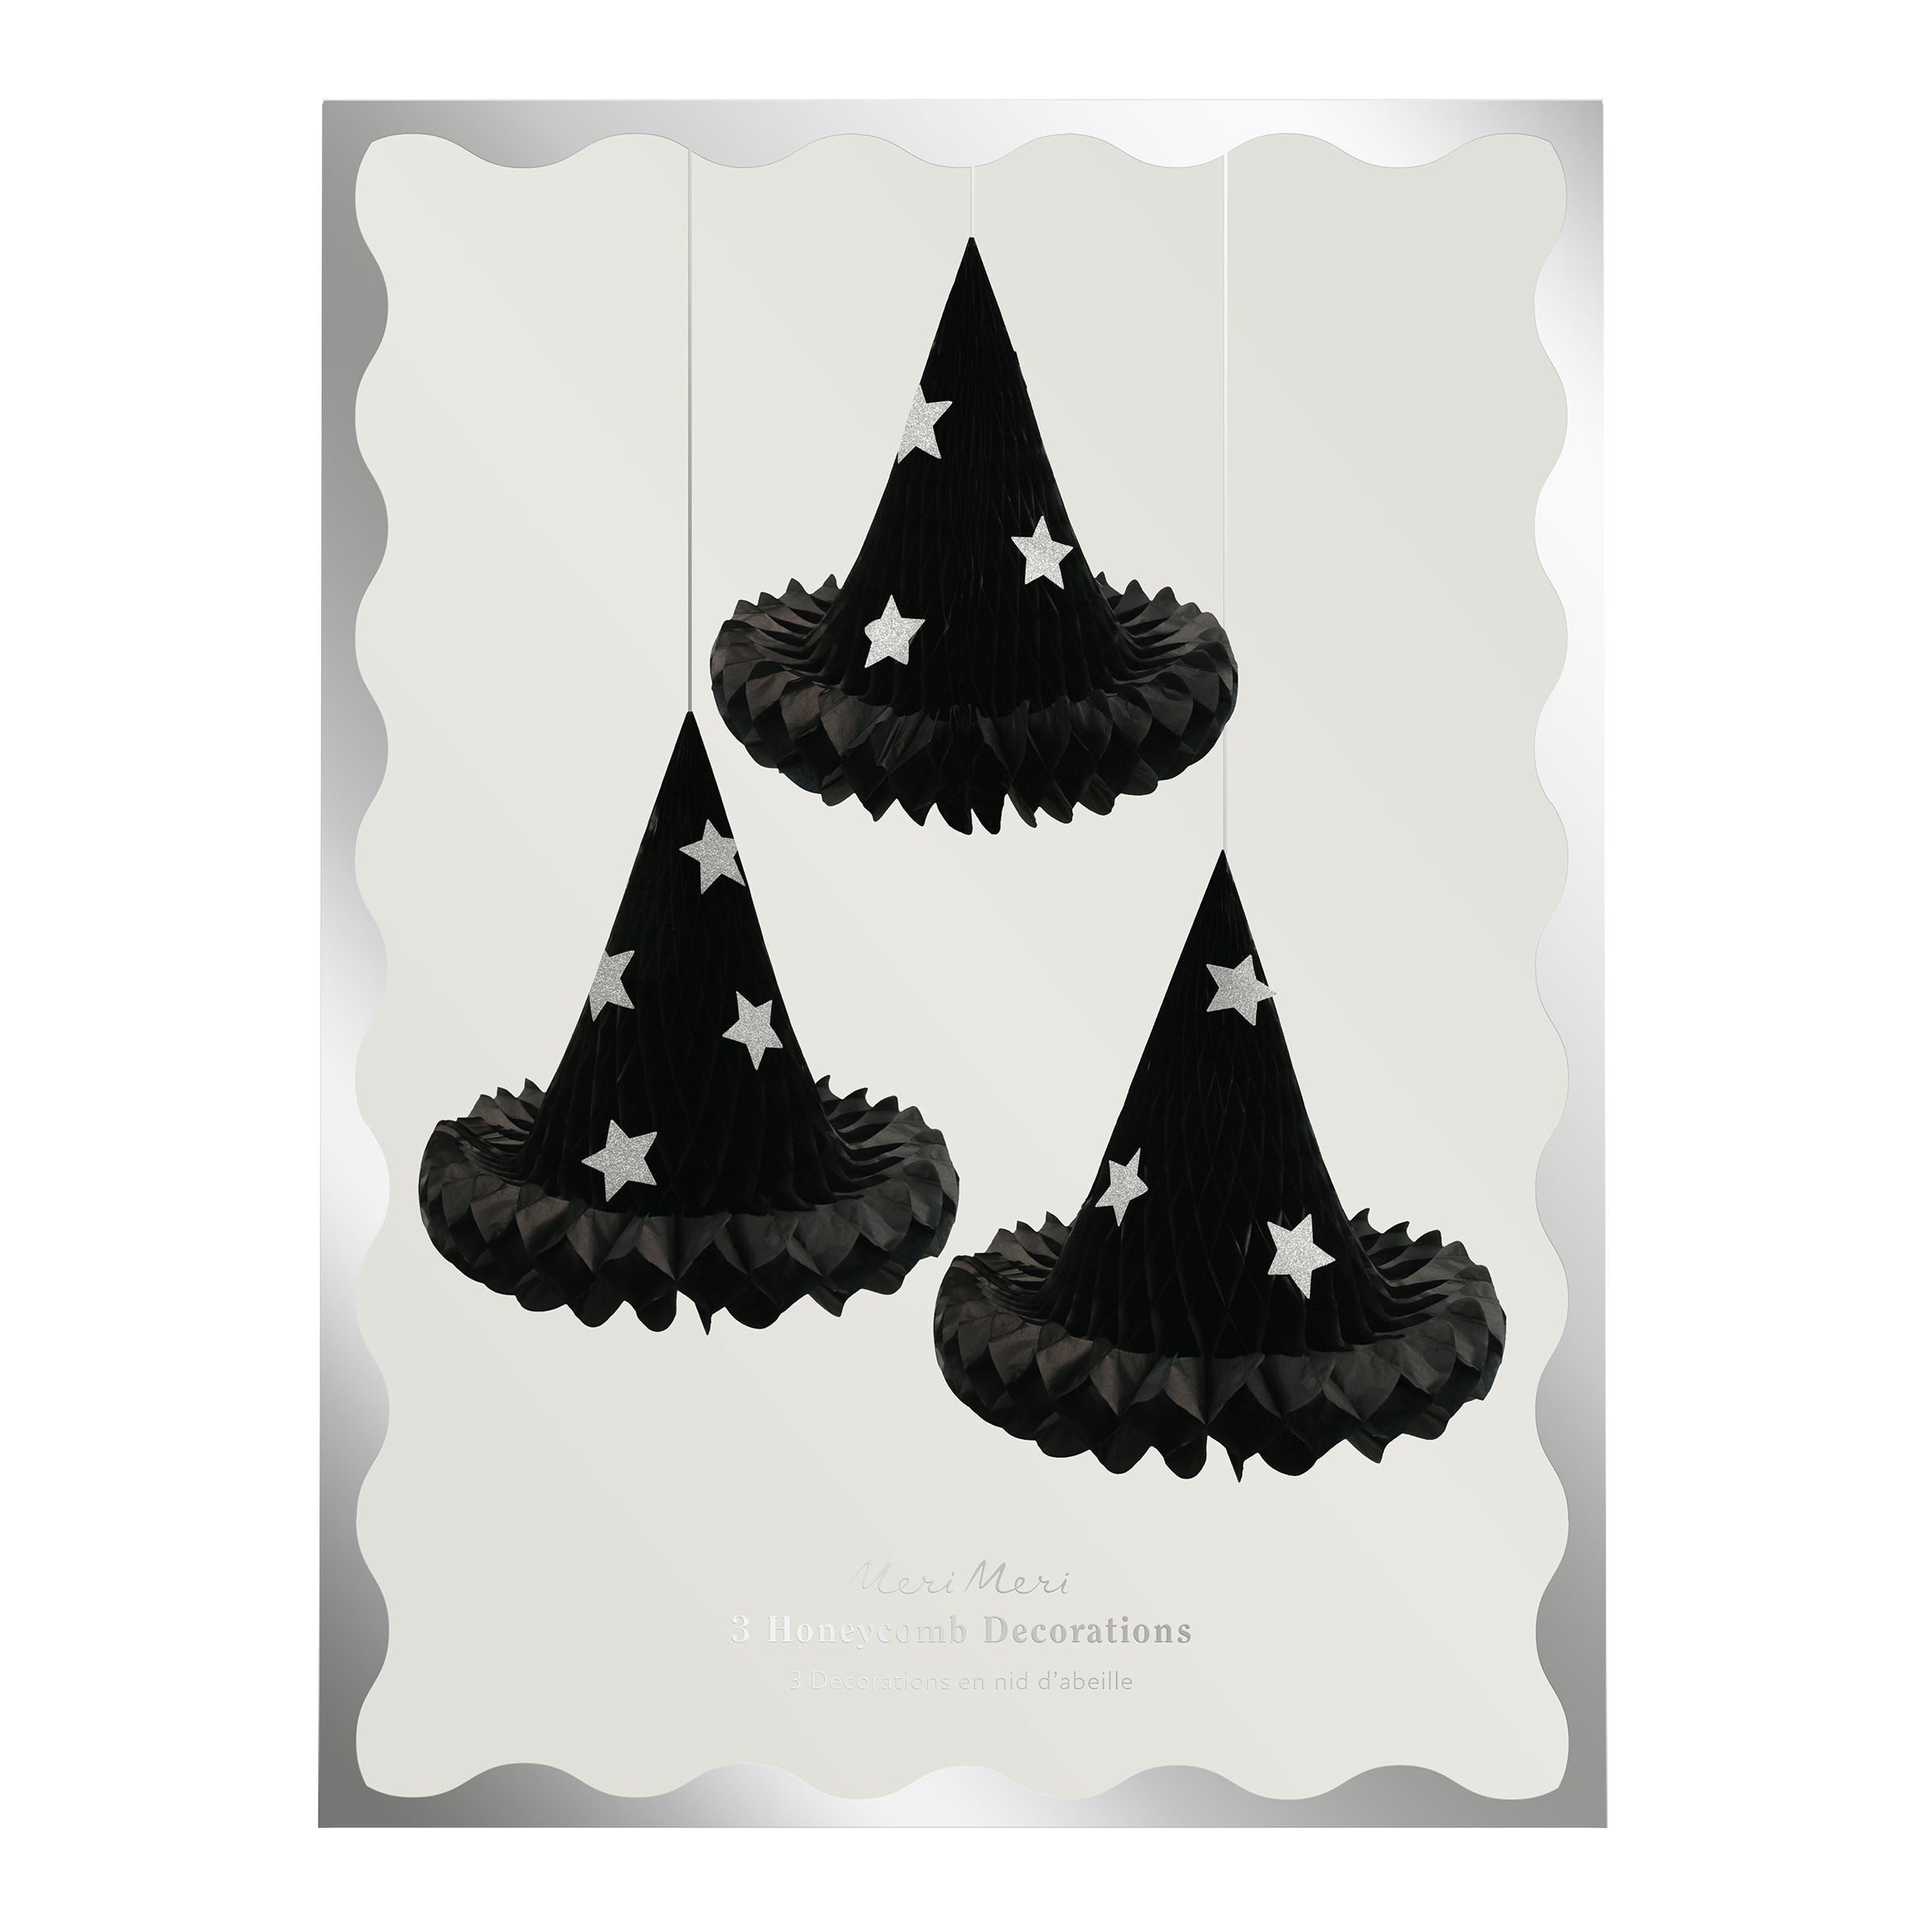 Our witch hats, with silver glitter stars, are the perfect hanging Halloween decorations.